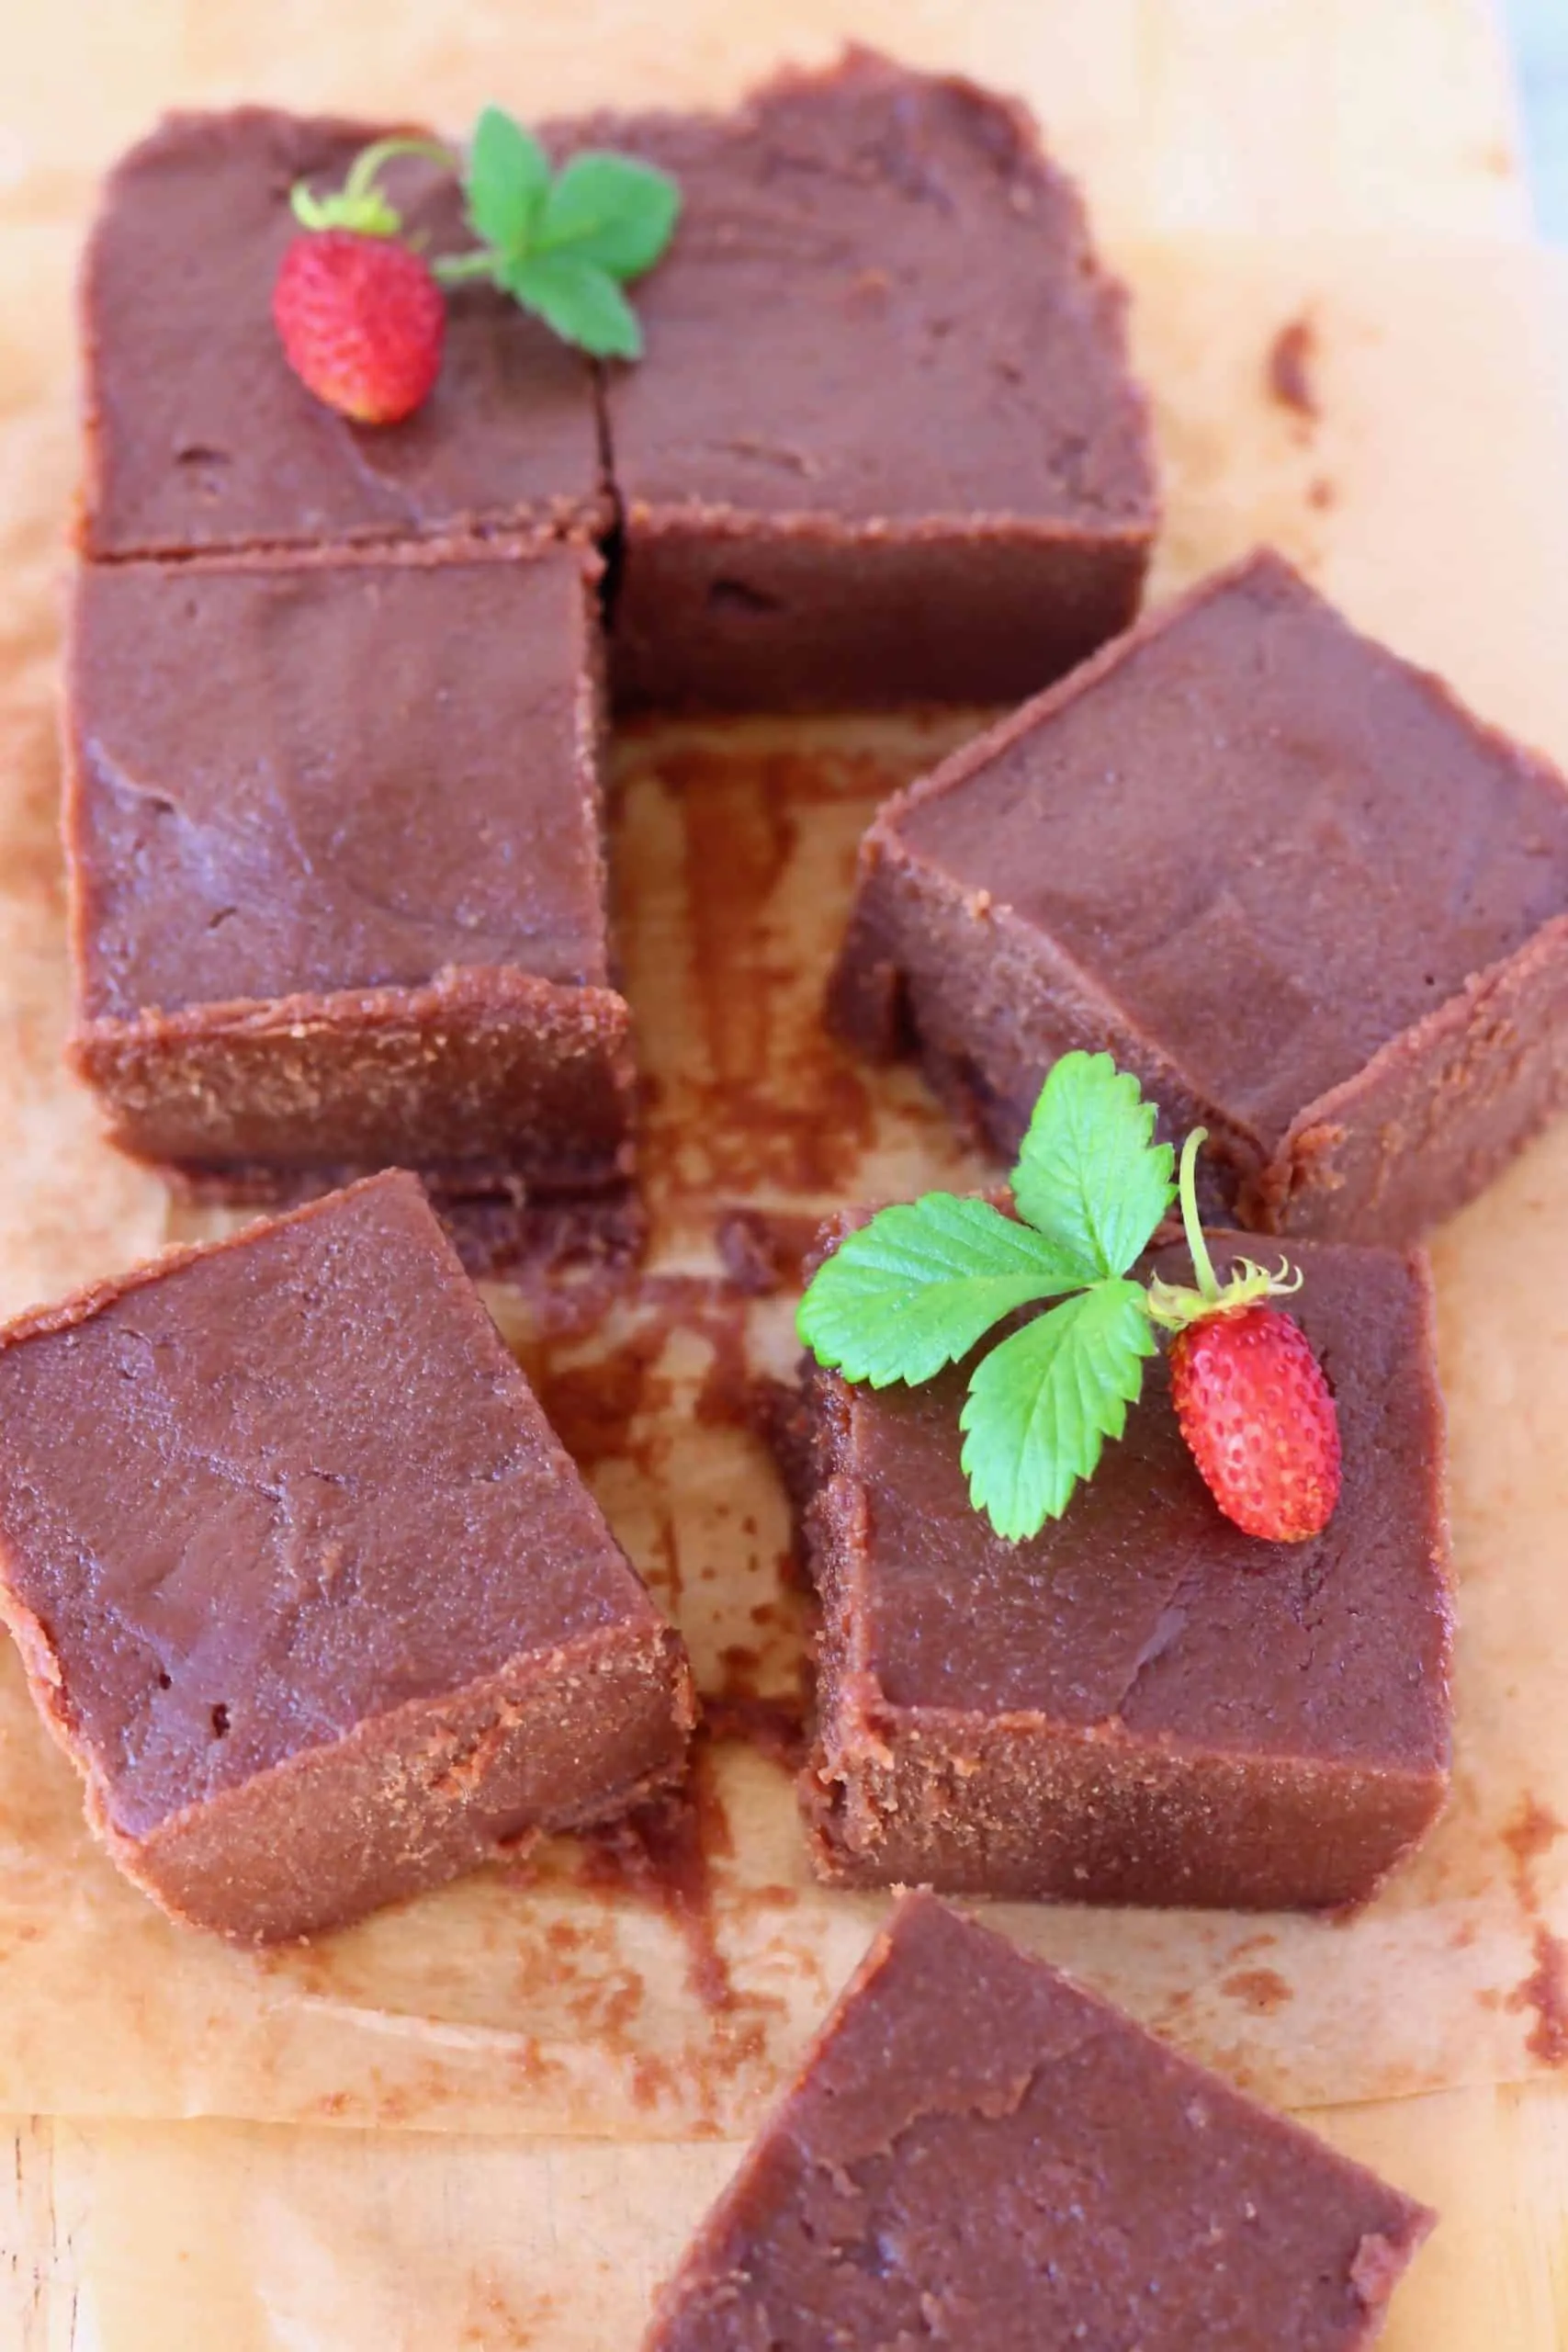 Seven squares of chocolate fudge on baking paper